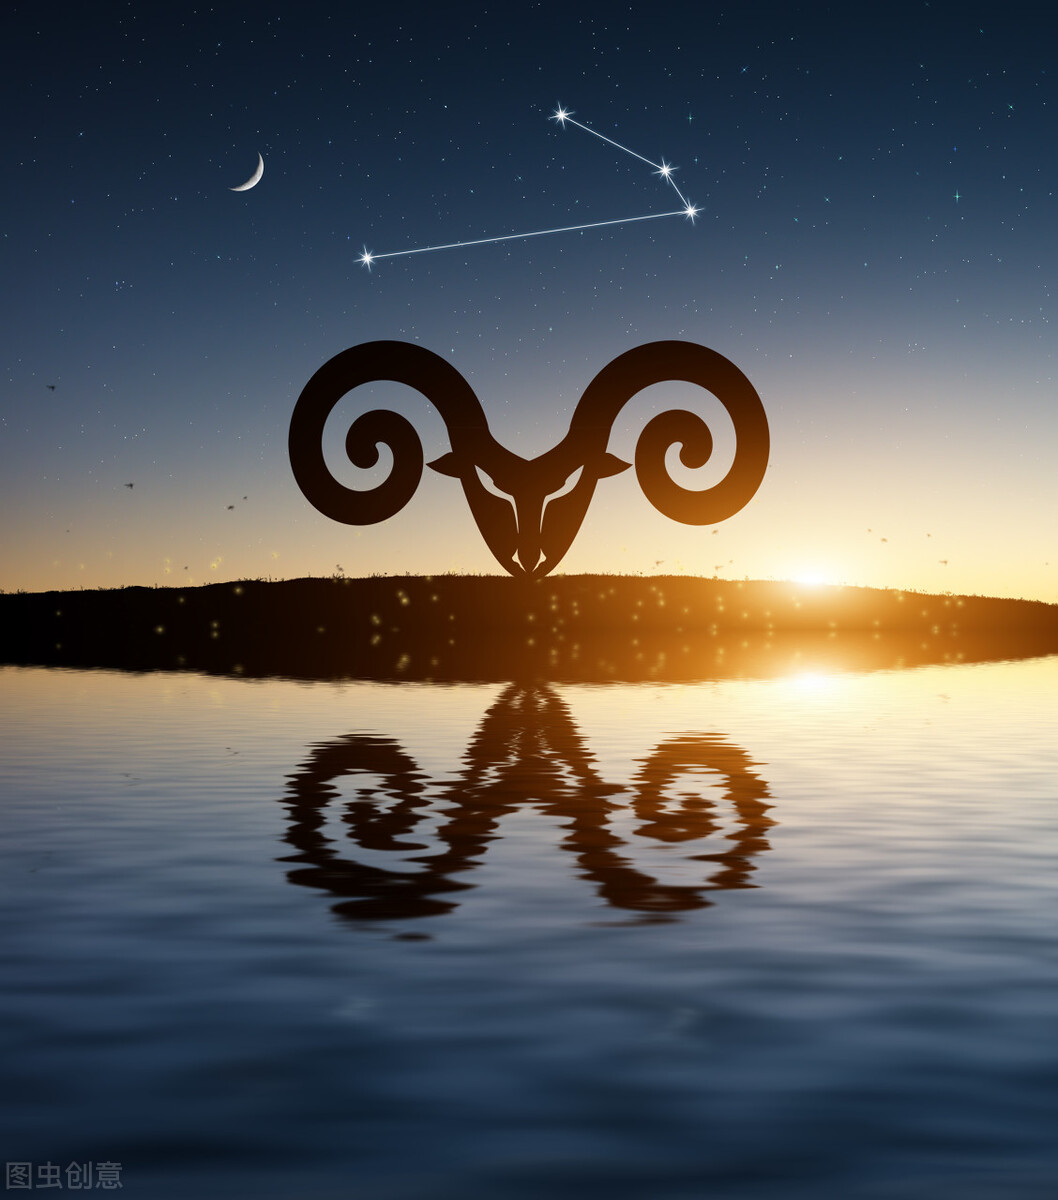 March 20 Astrology Sun enters Aries iNEWS